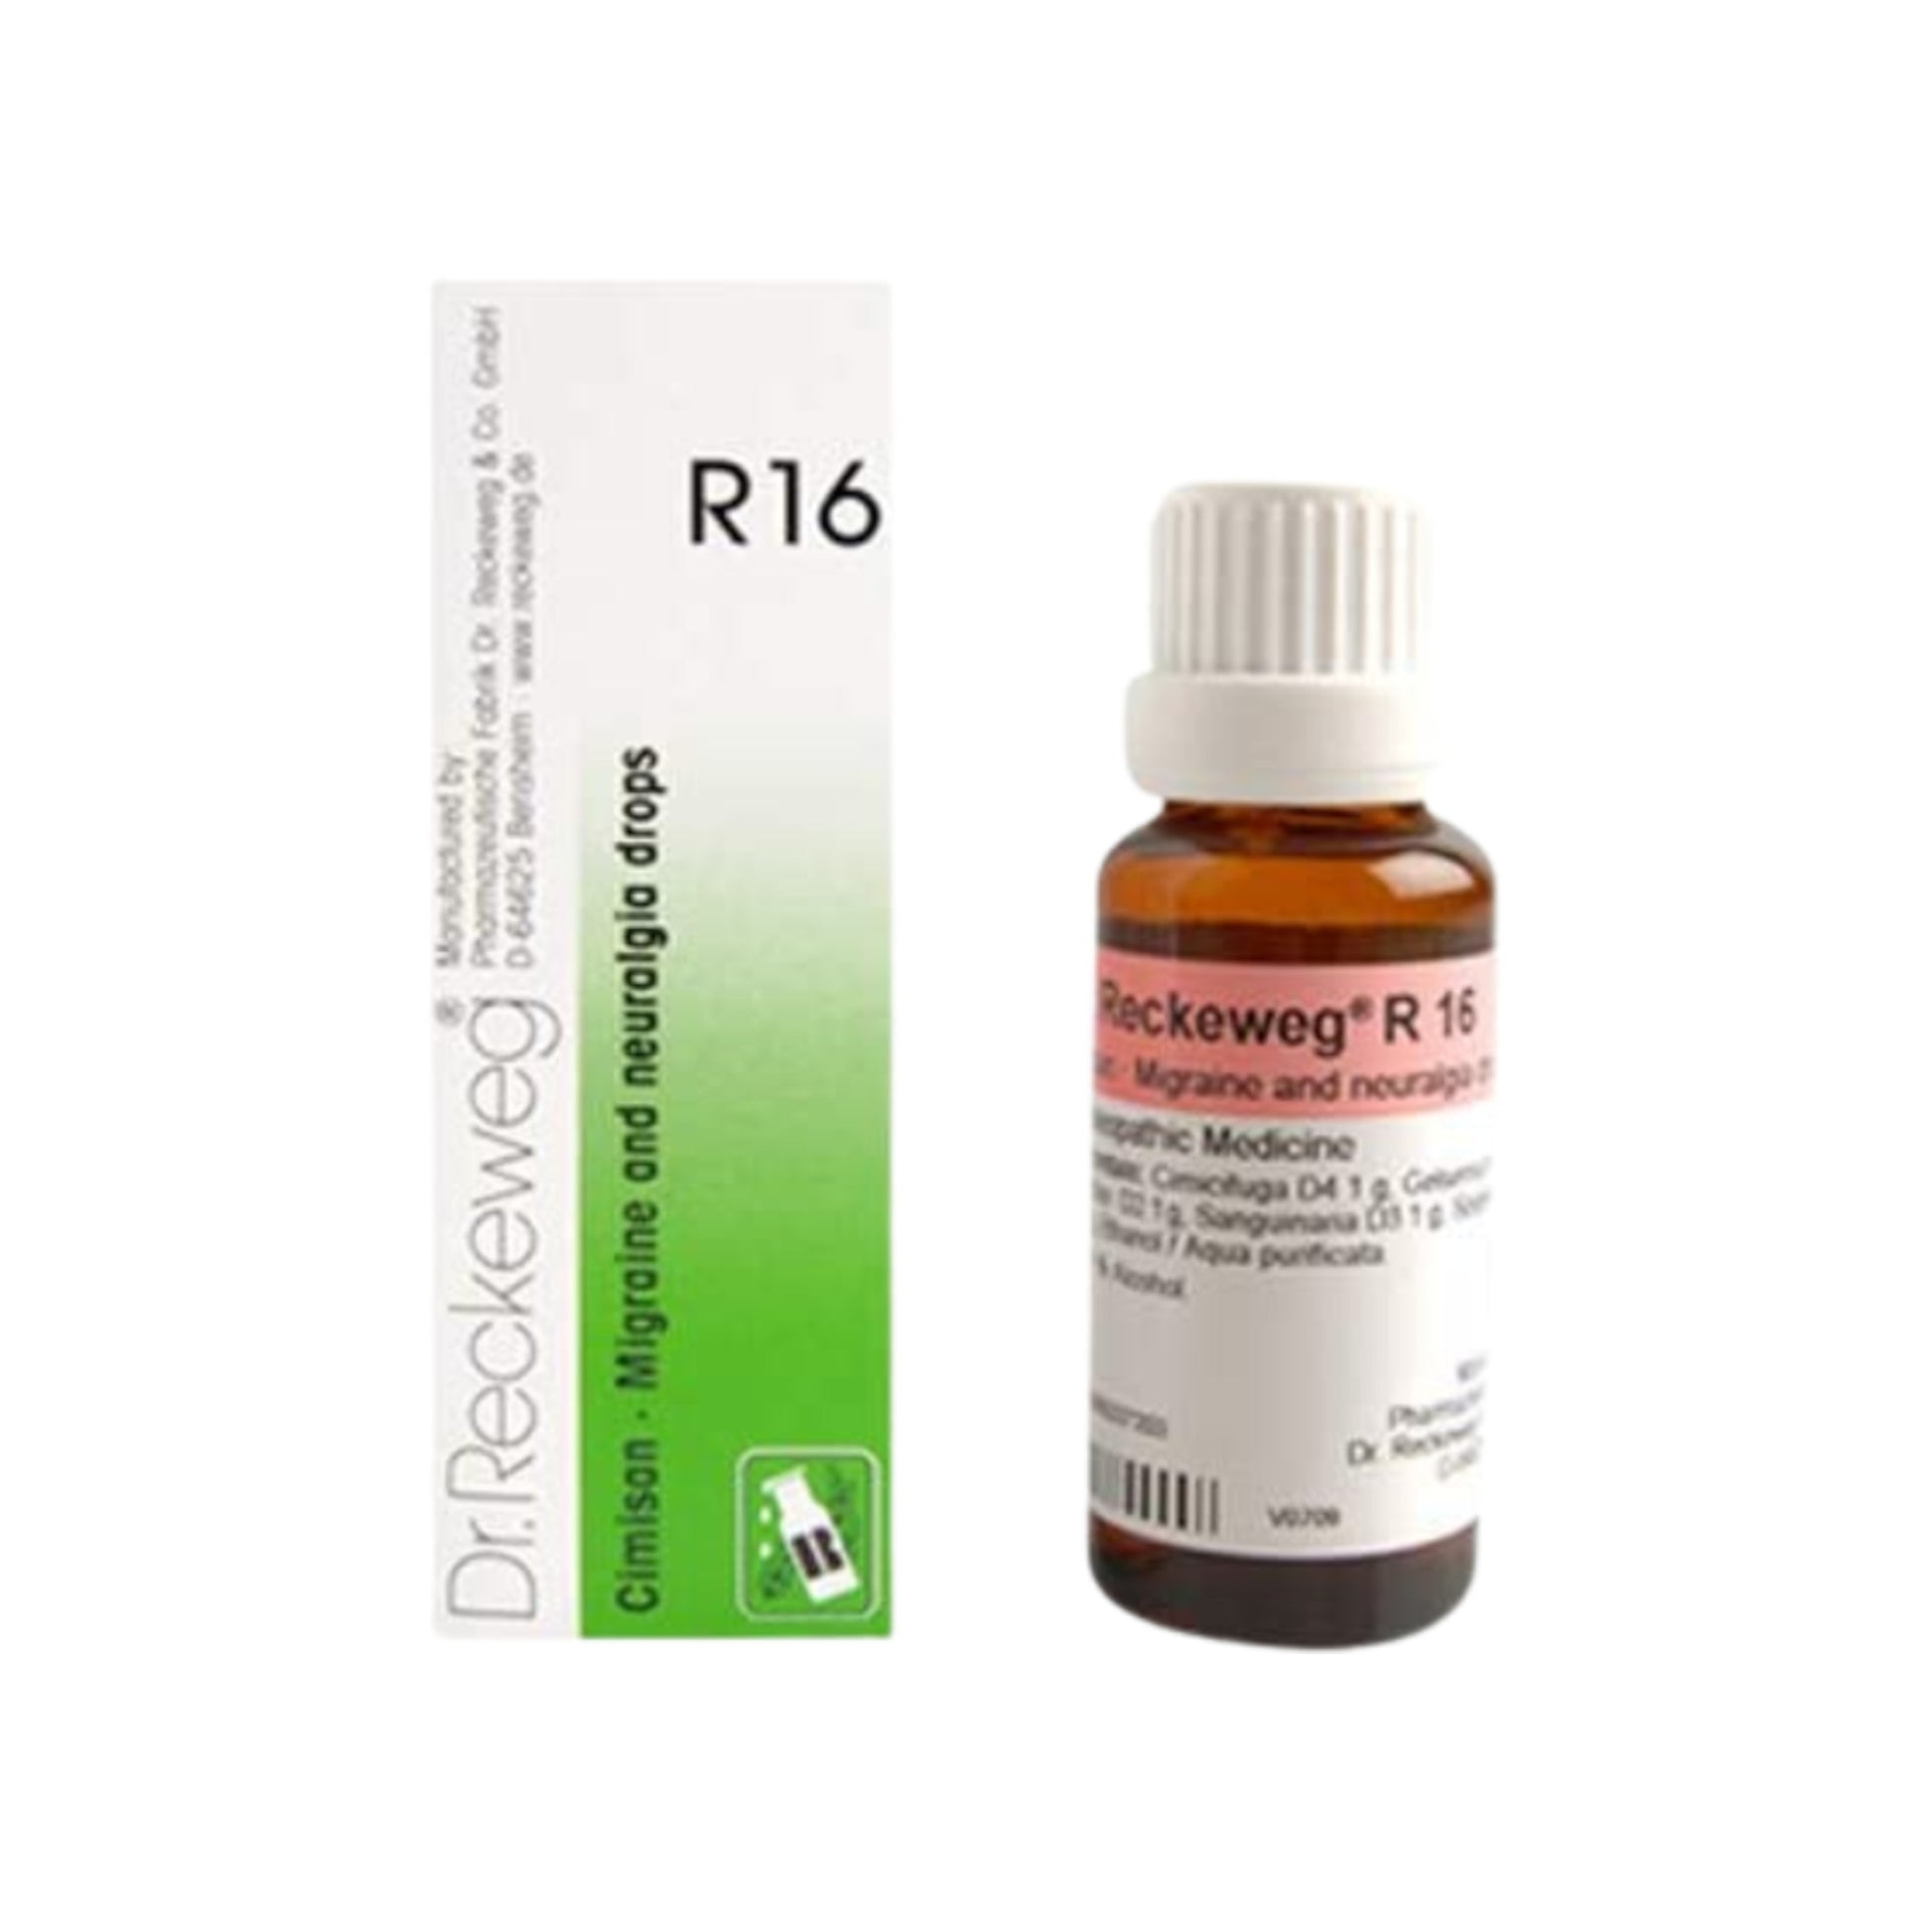 Image for DR. RECKEWEG R16 - Migraine Relief Drops: Homeopathic remedy for migraine and nervous headaches, reducing their frequency and intensity.